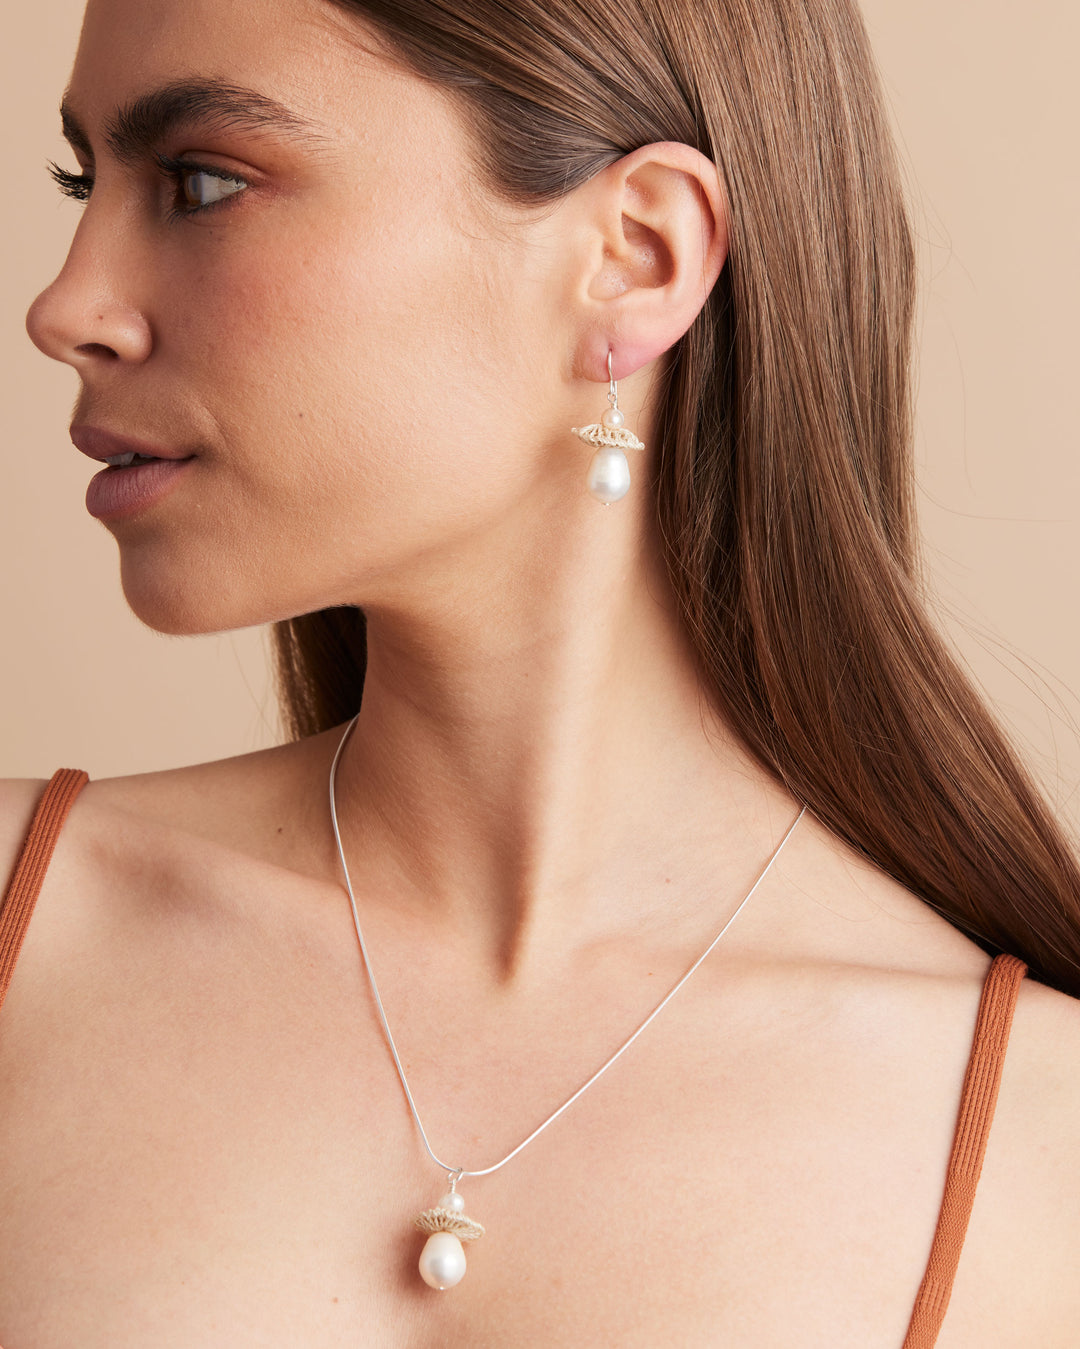 Model wearing silver chain with natural fibre and pearl pendant